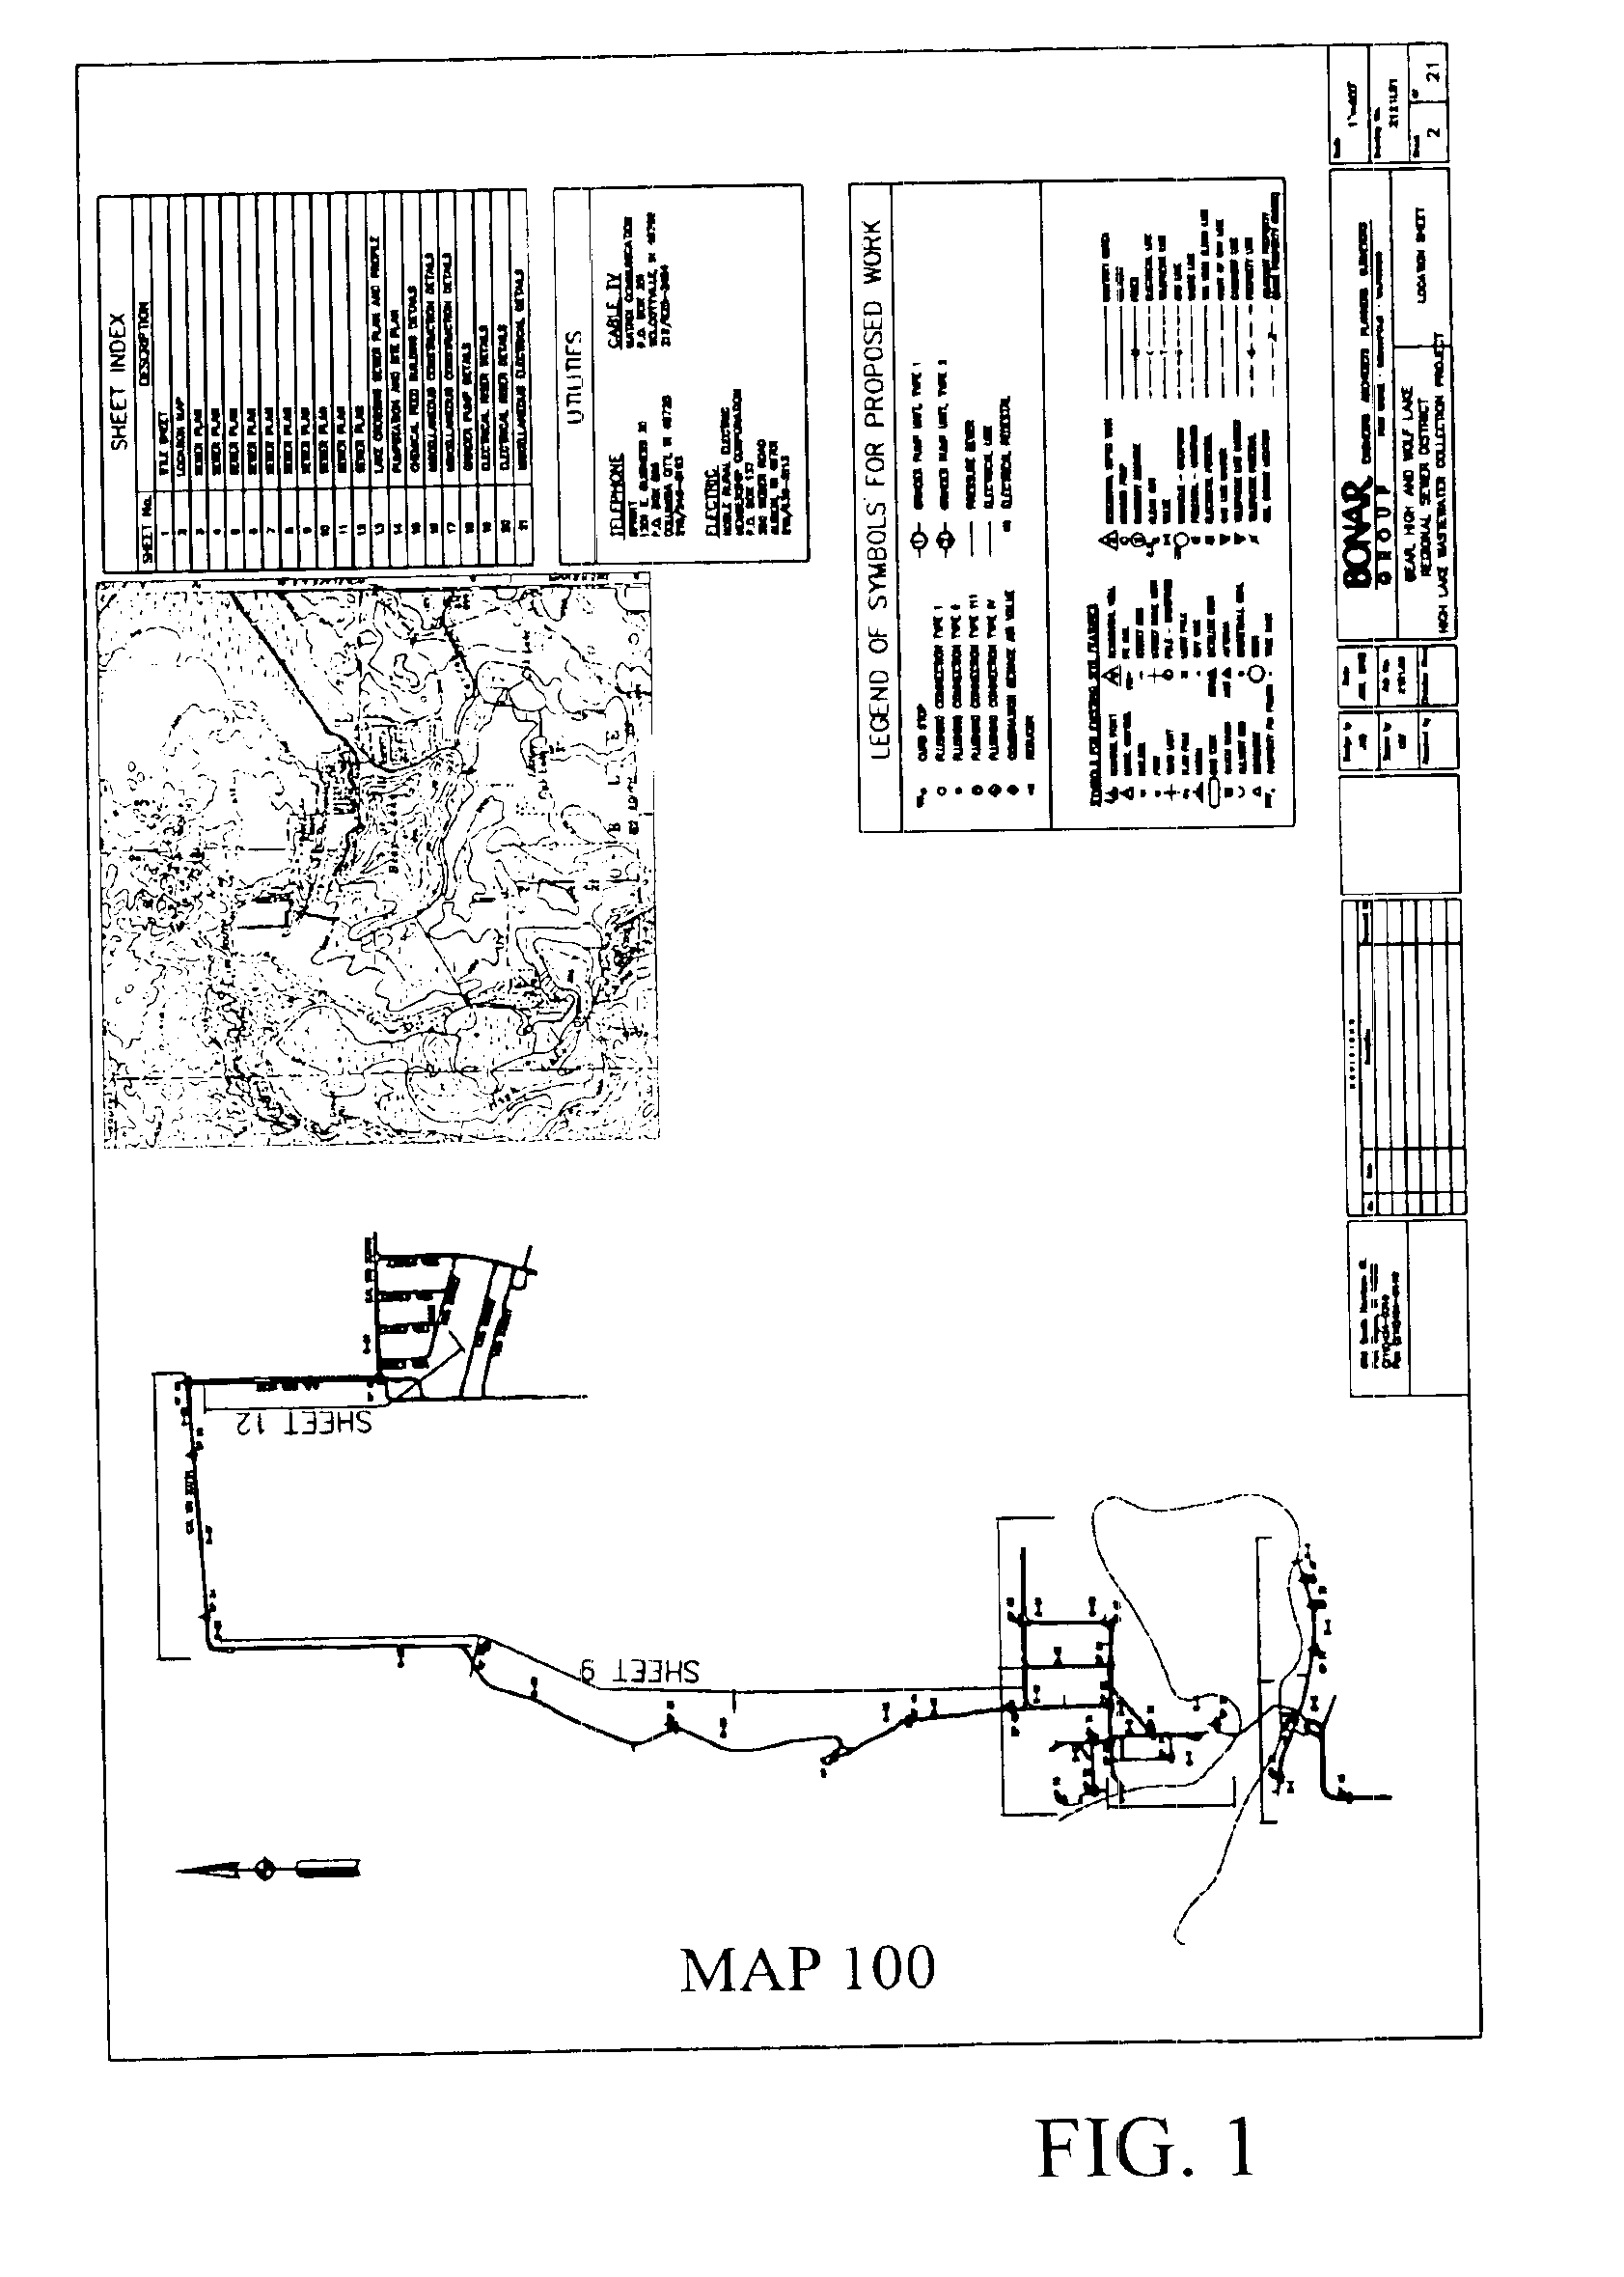 Municipal utility mapping system and method